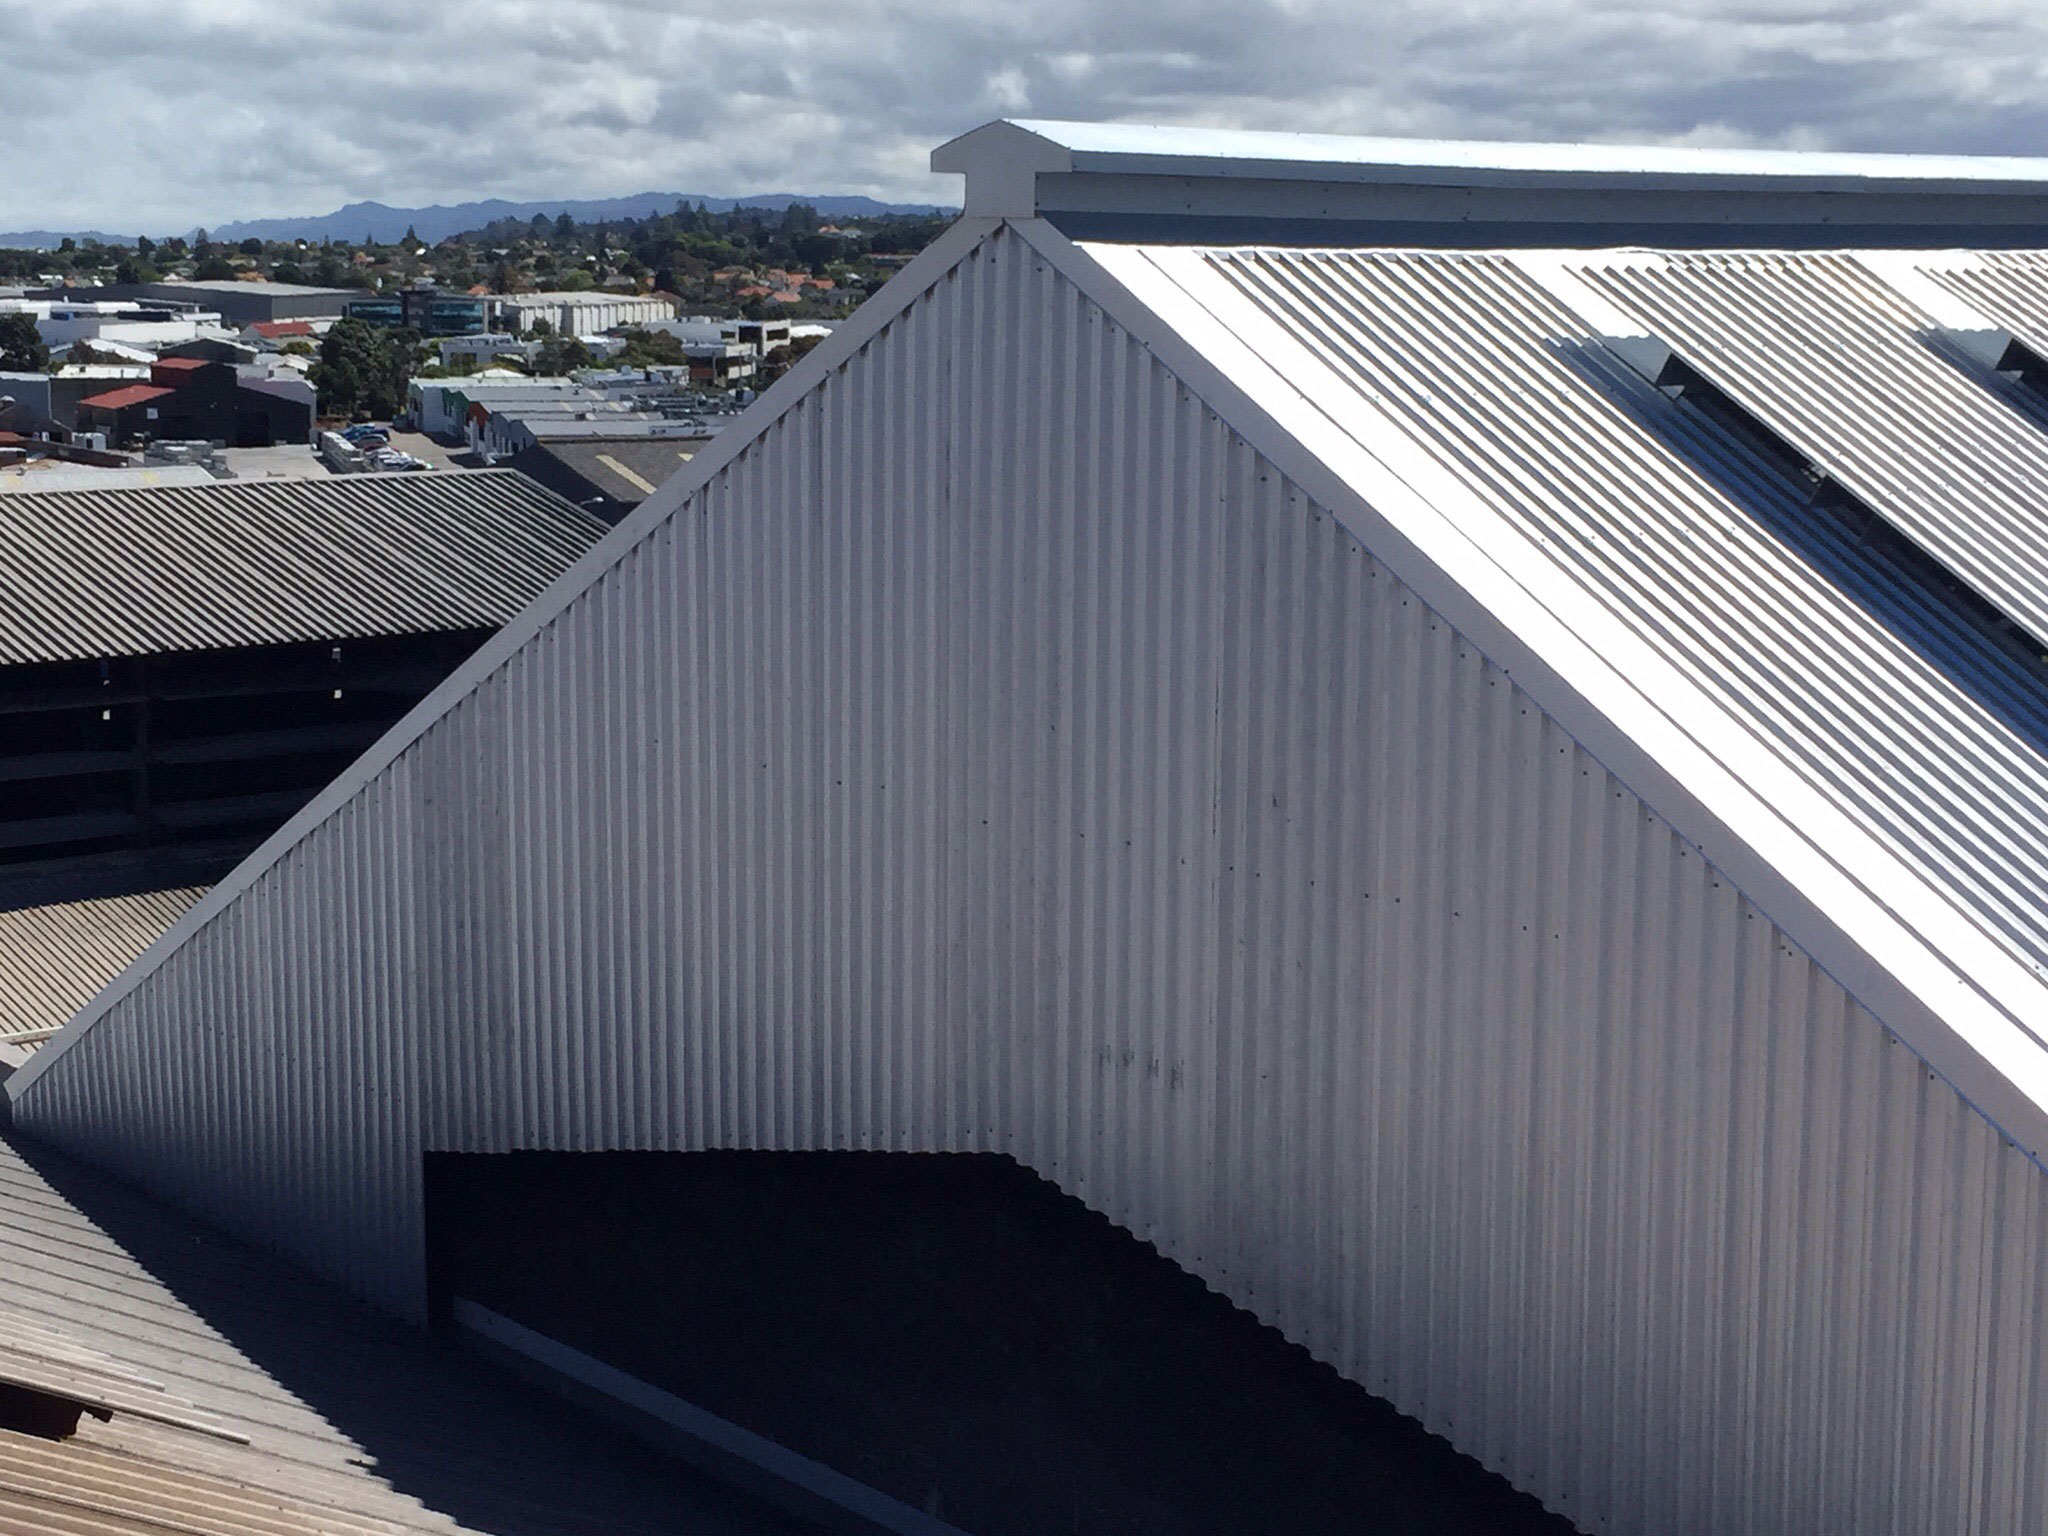 auckland roofing solutions services auckland and new zealand wide new roofs repair cladding and more Project gallery 47